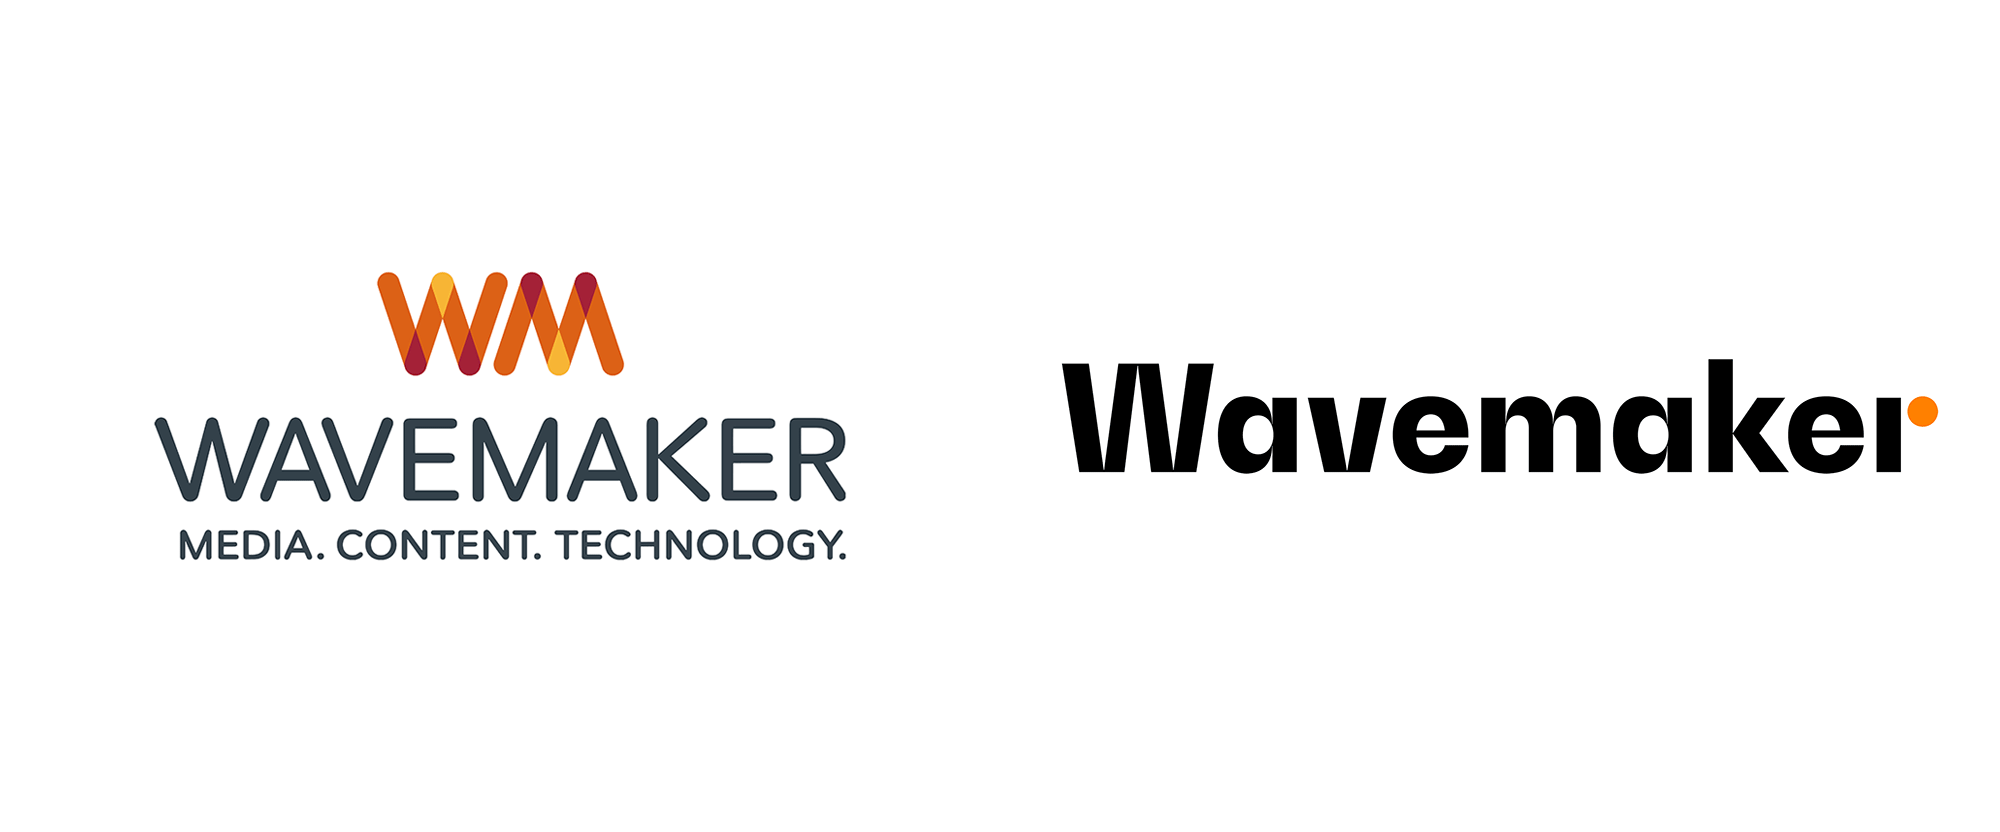 New Logo and Identity for Wavemaker by NB